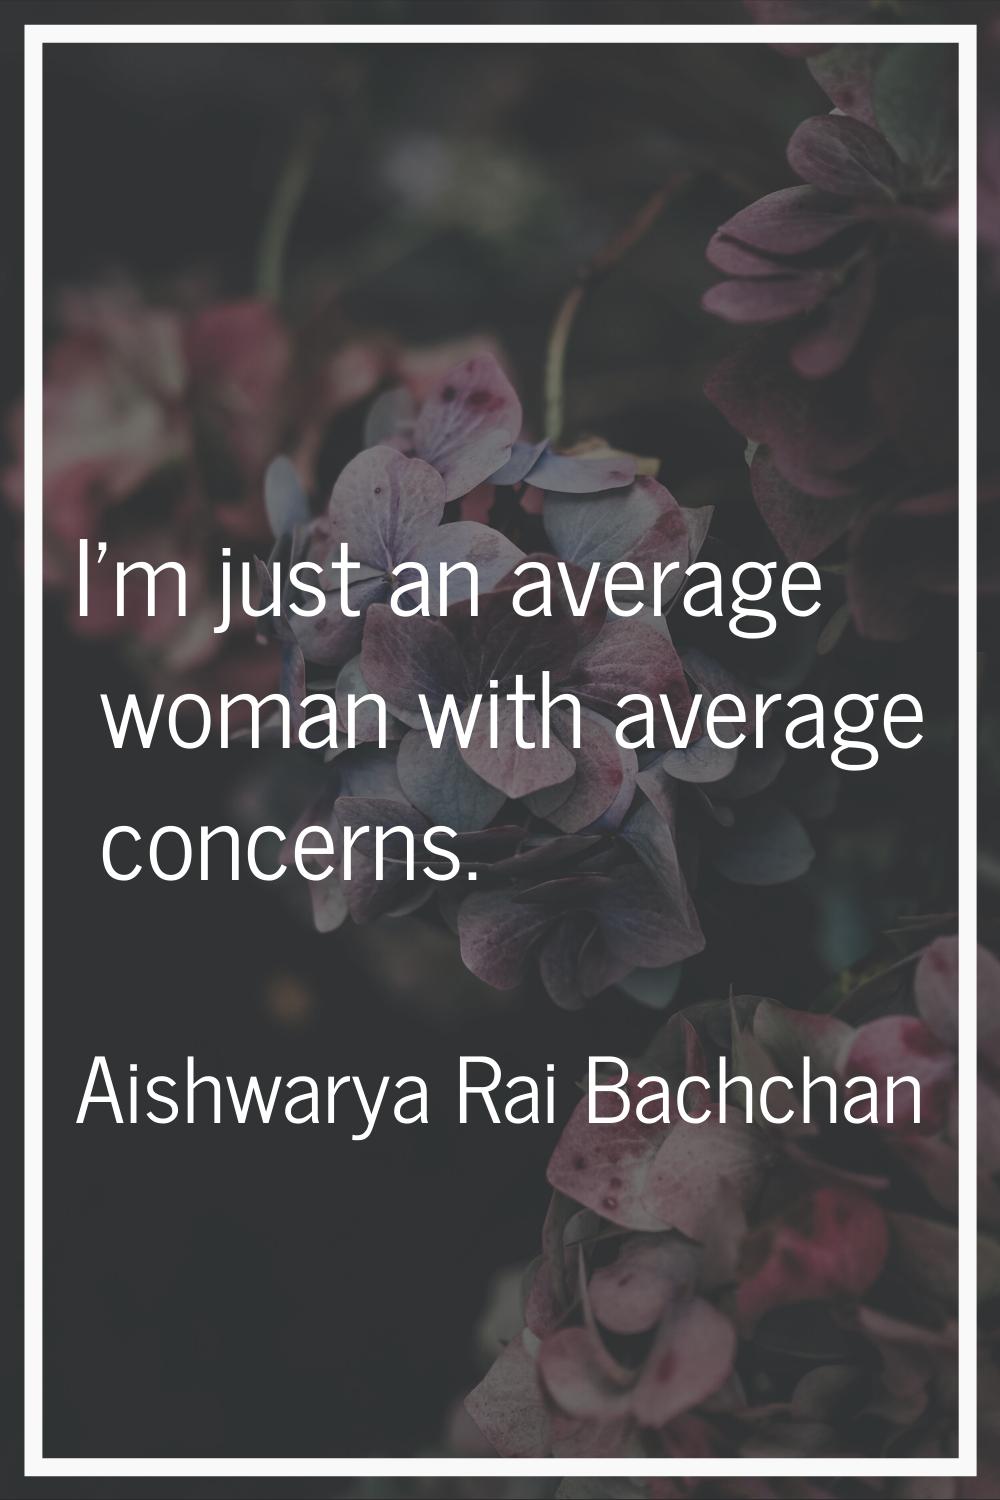 I'm just an average woman with average concerns.